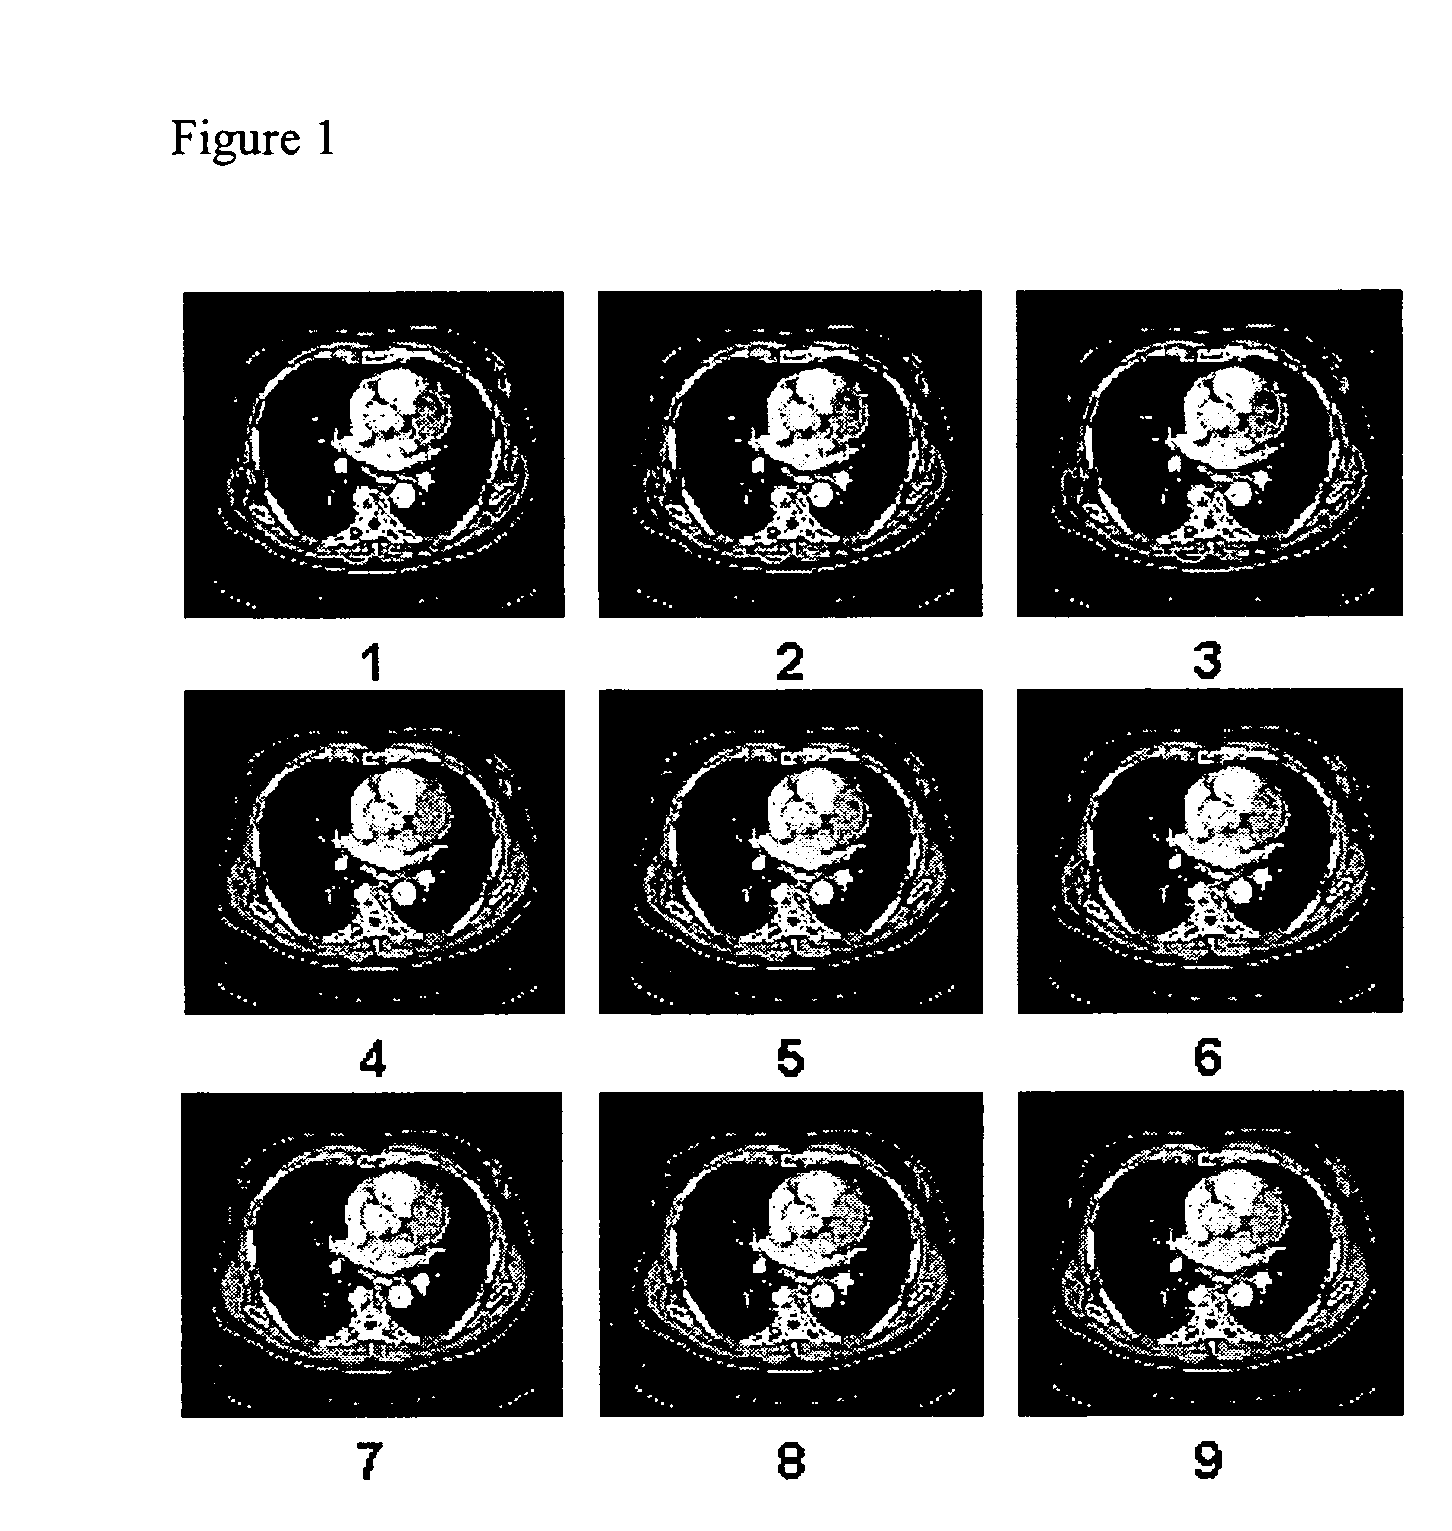 System and method for displaying images on a pacs workstation based on level of significance